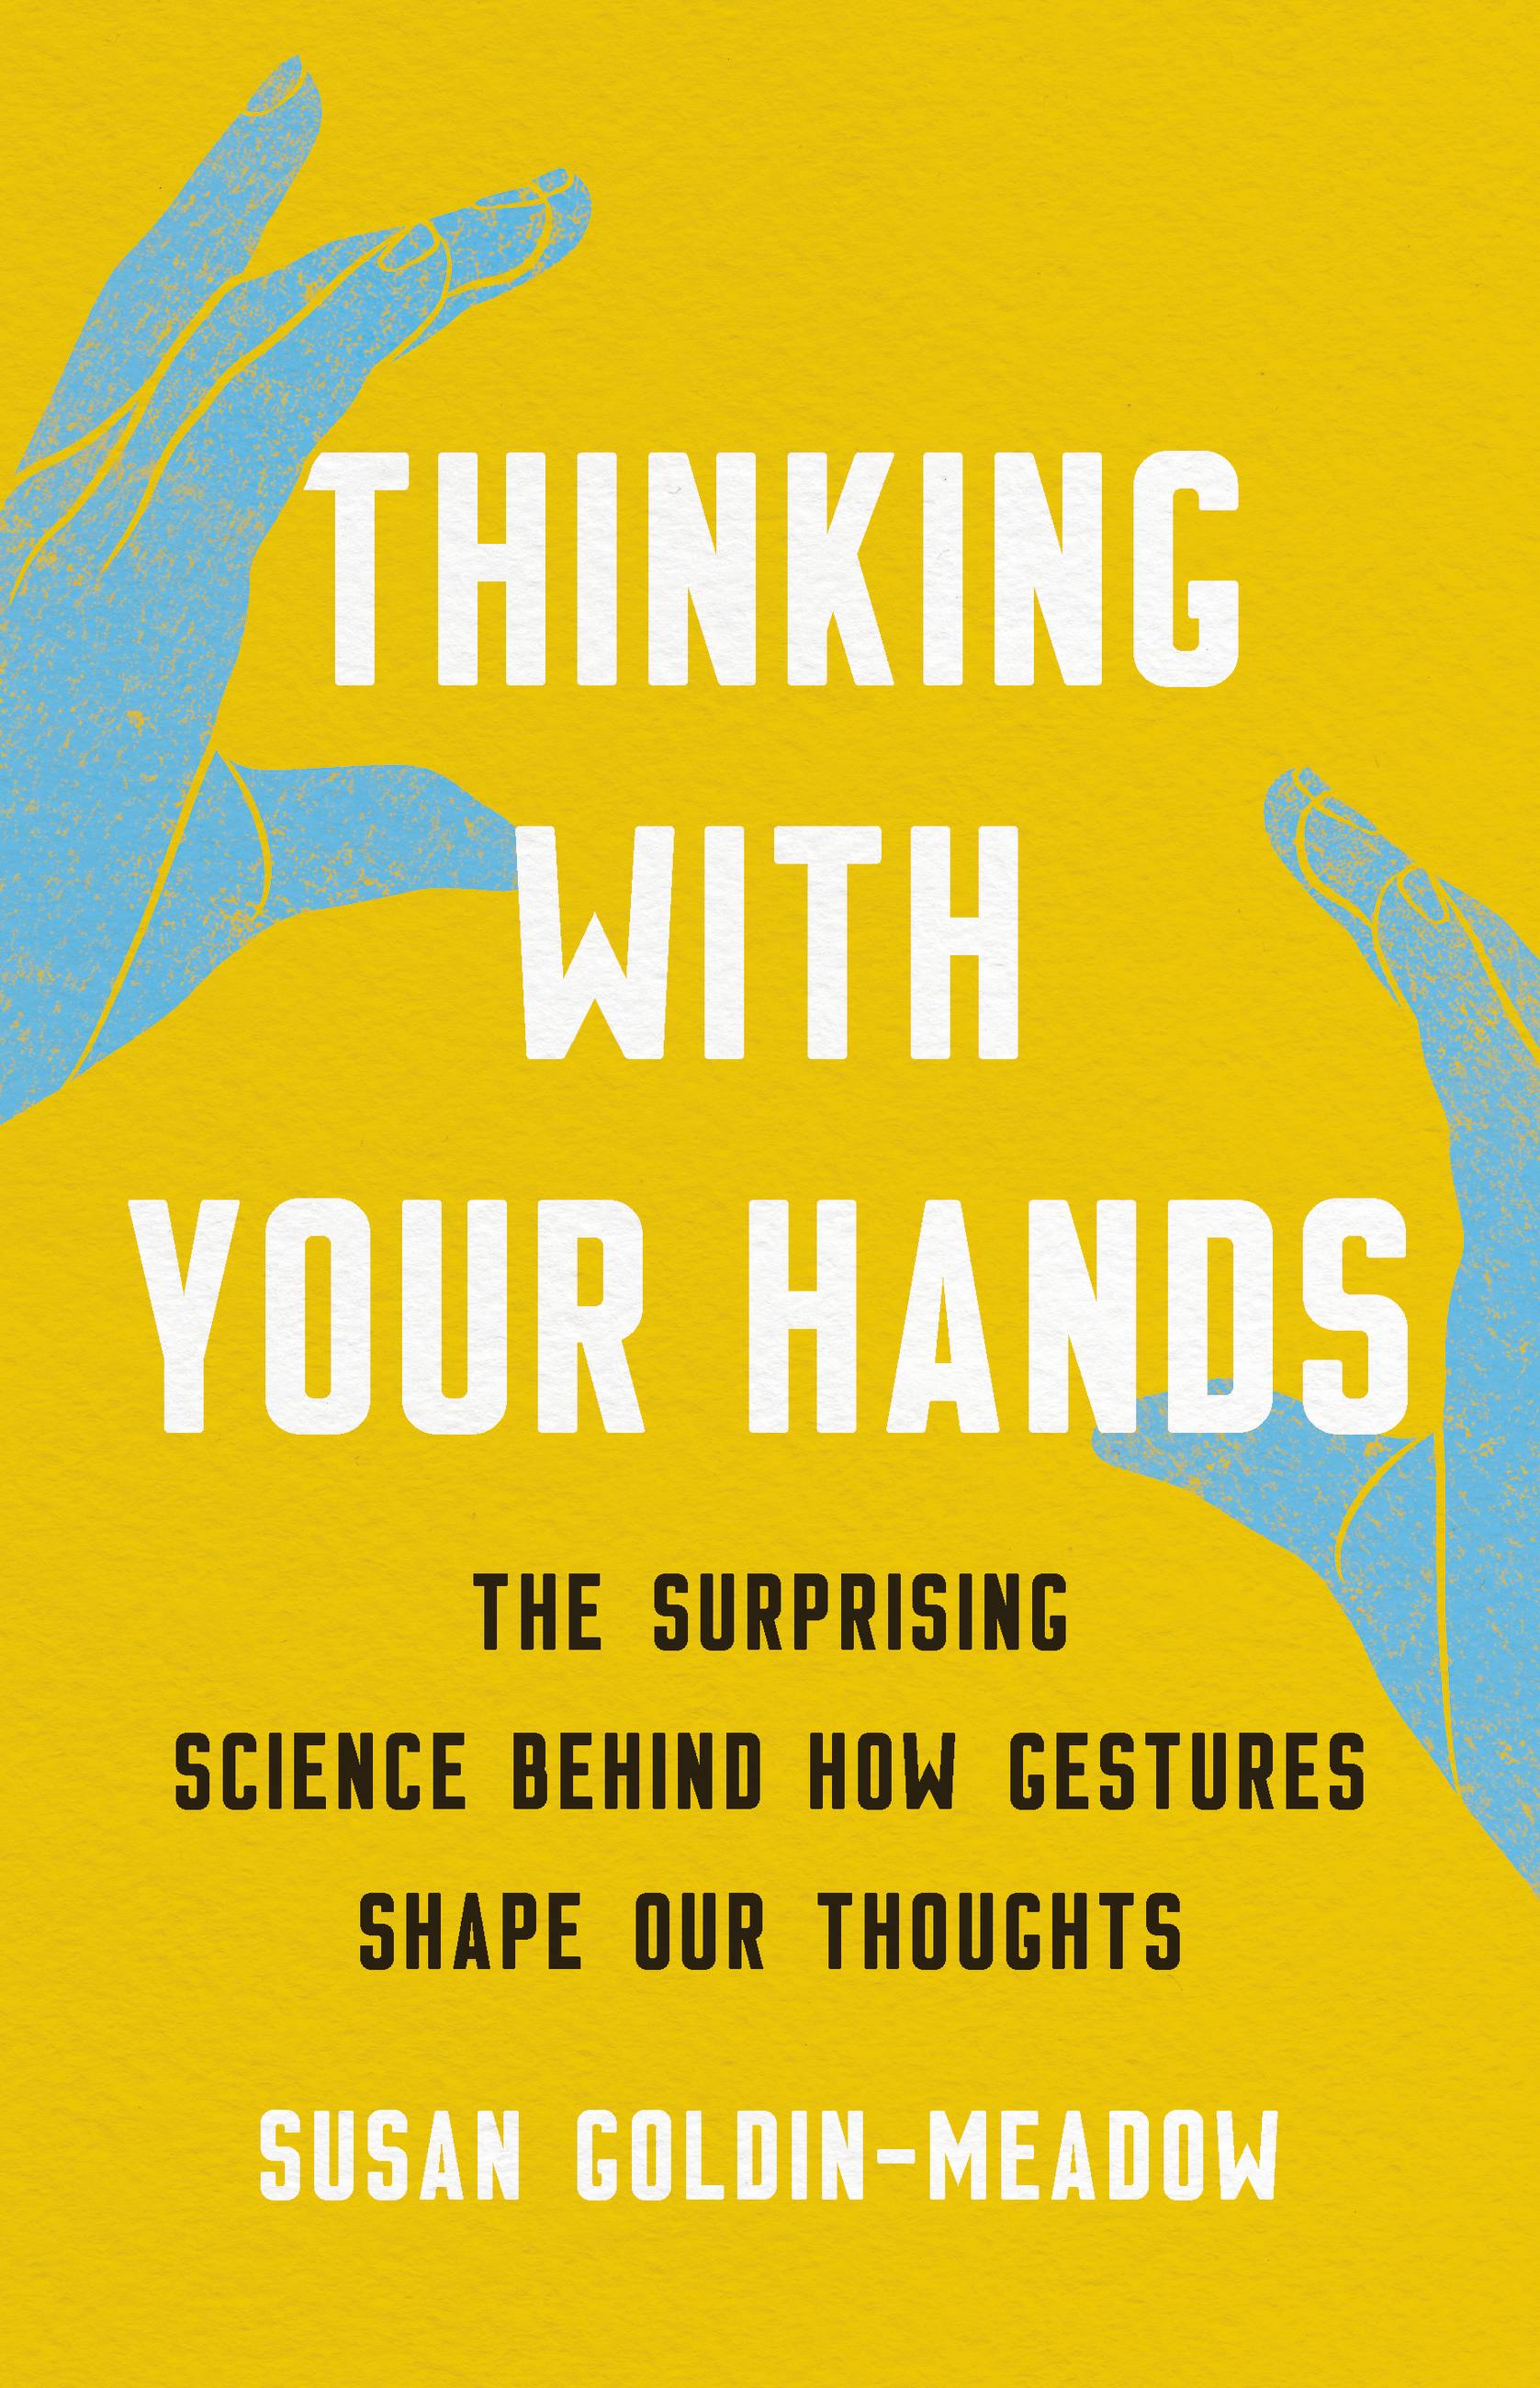 thinking with your hands book review